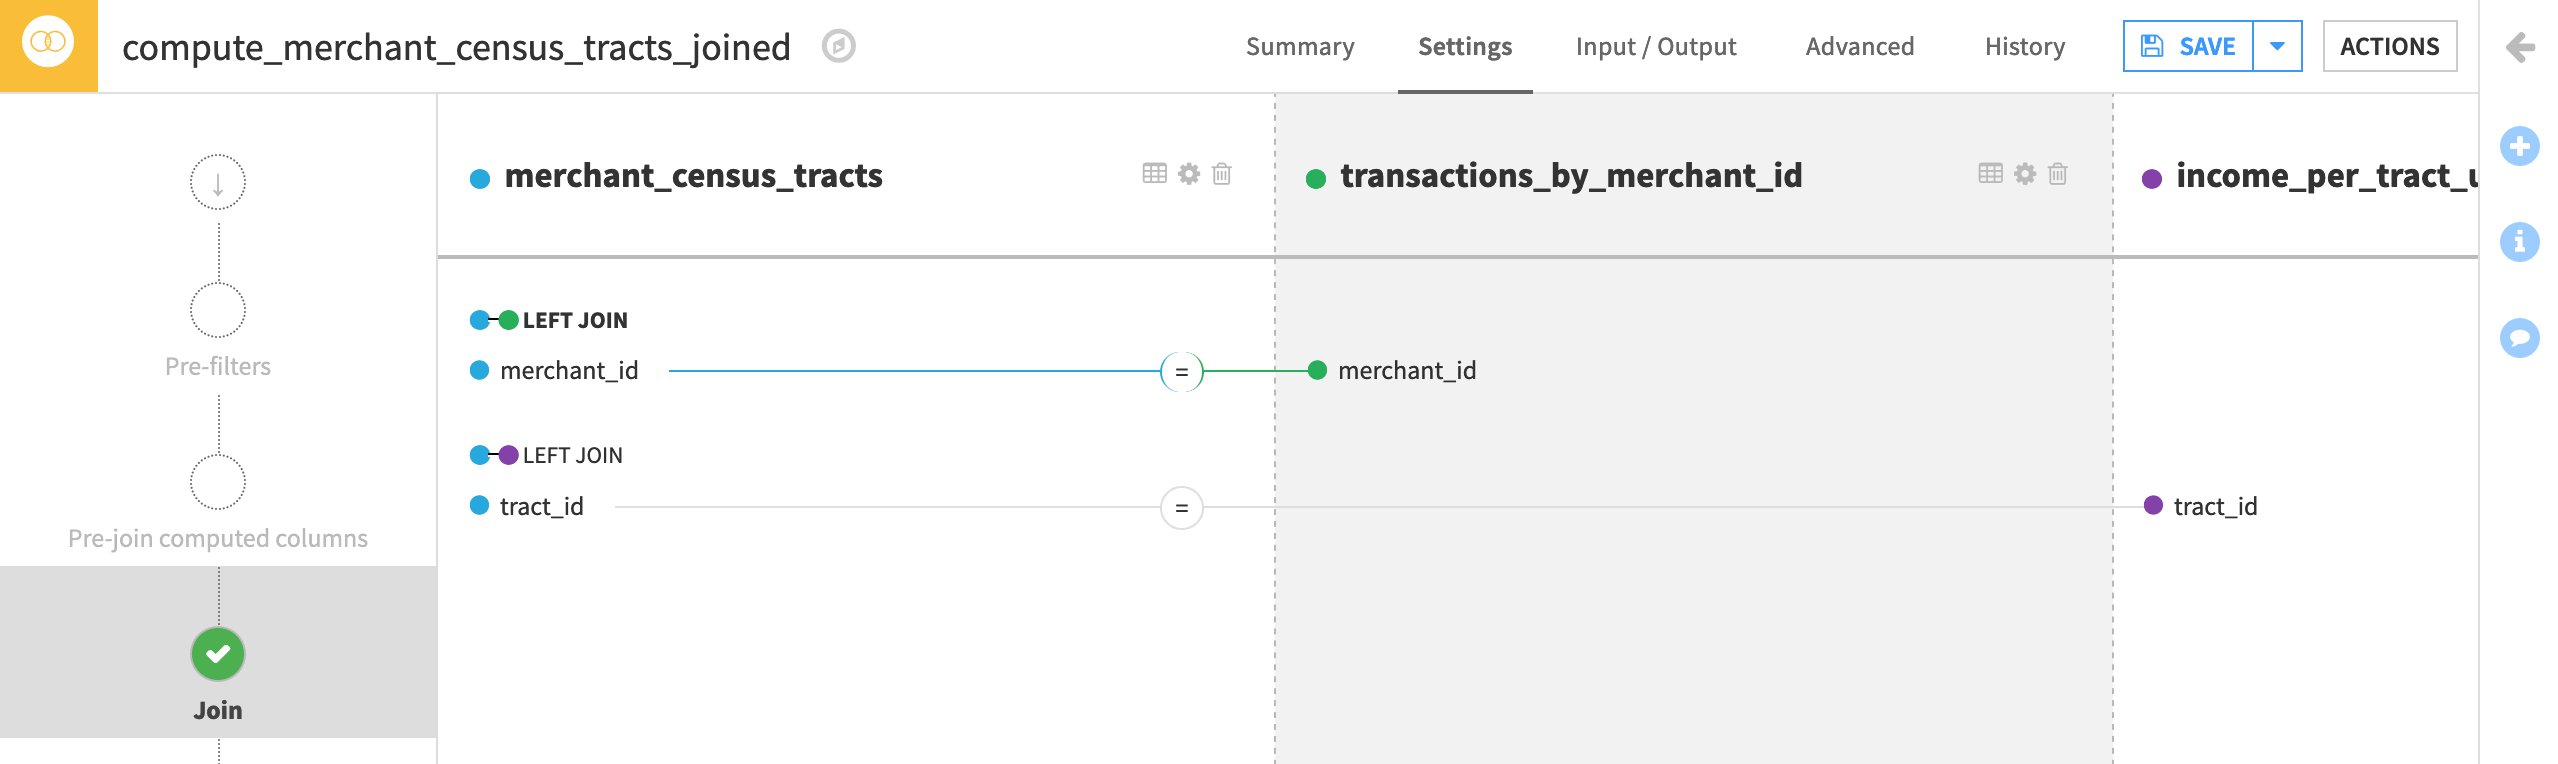 A Dataiku screenshot of the Join recipe settings left joining transactions_by_merchant_id and income_per_tract_usa_copy to merchant_census_tracts.